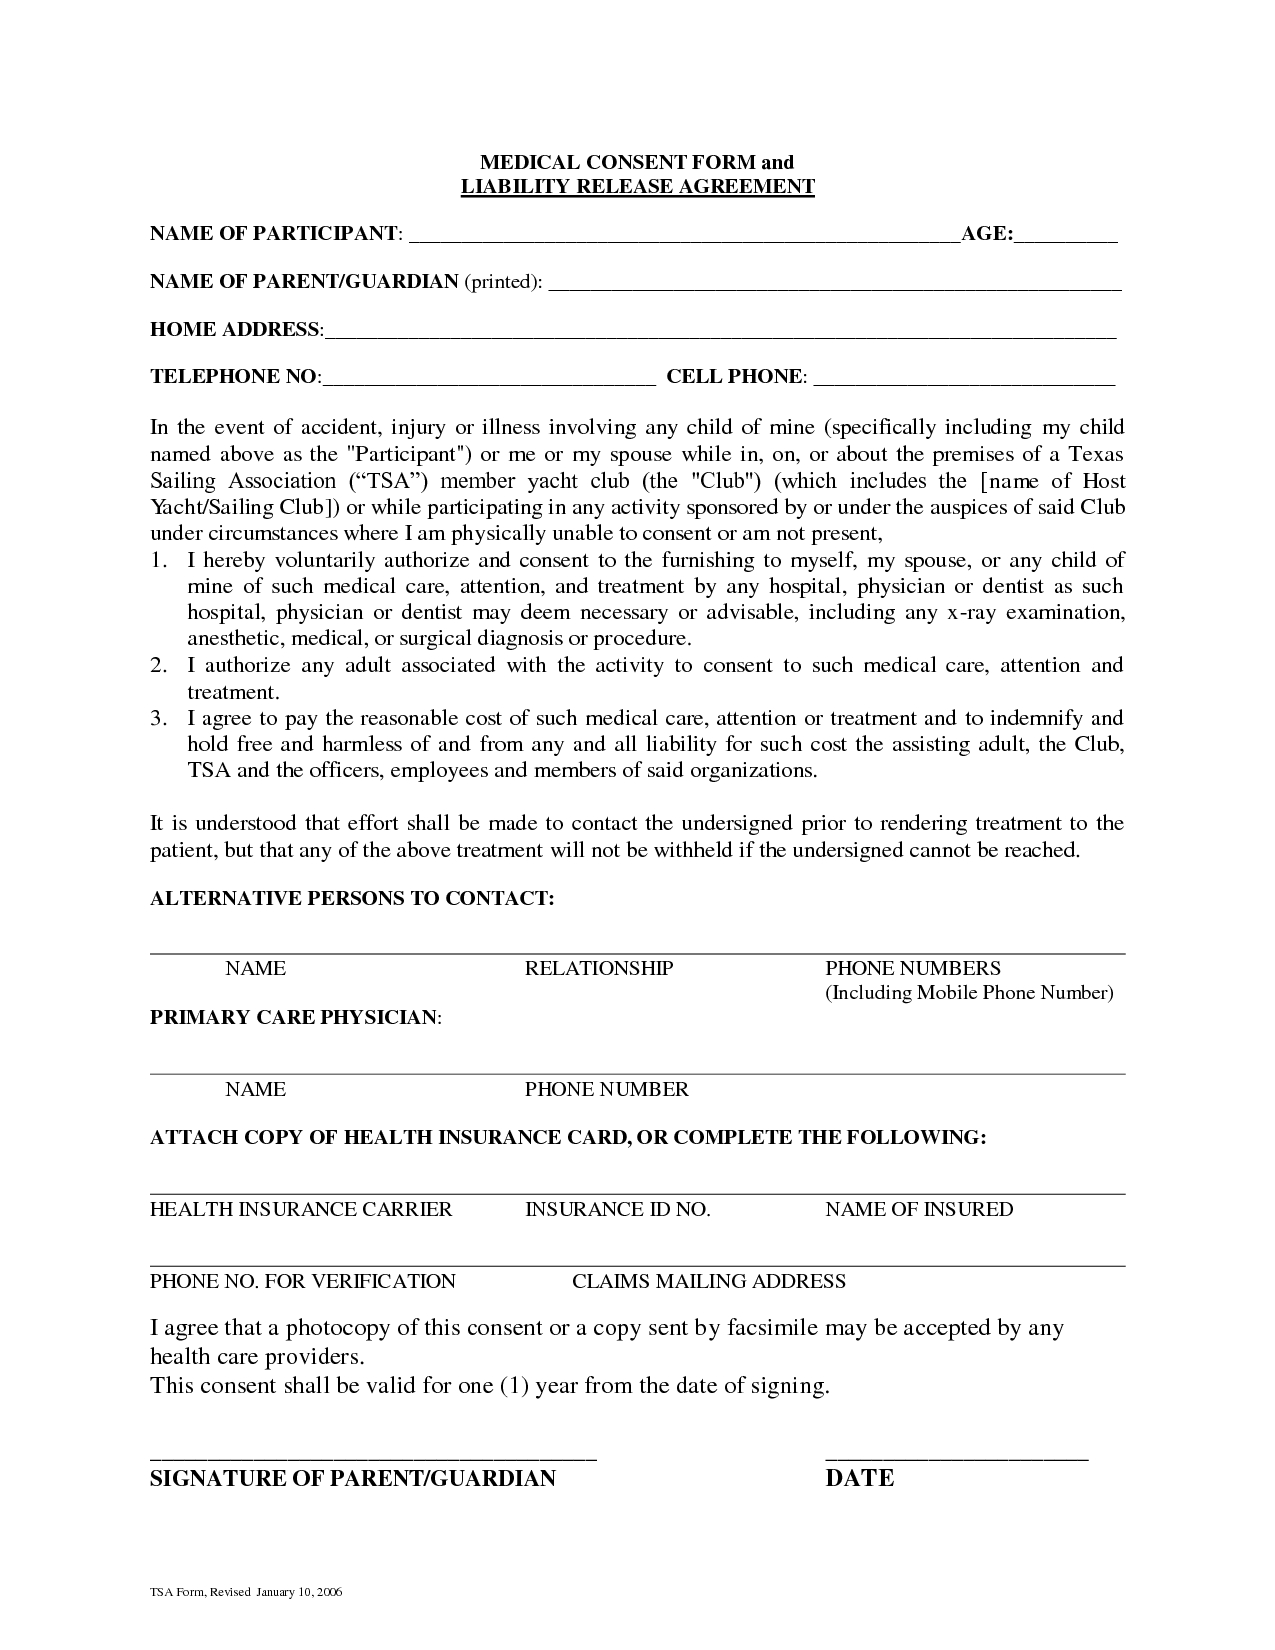 Consent Form To Release Medical Information Images - Medical - Free Printable Medical Consent Form